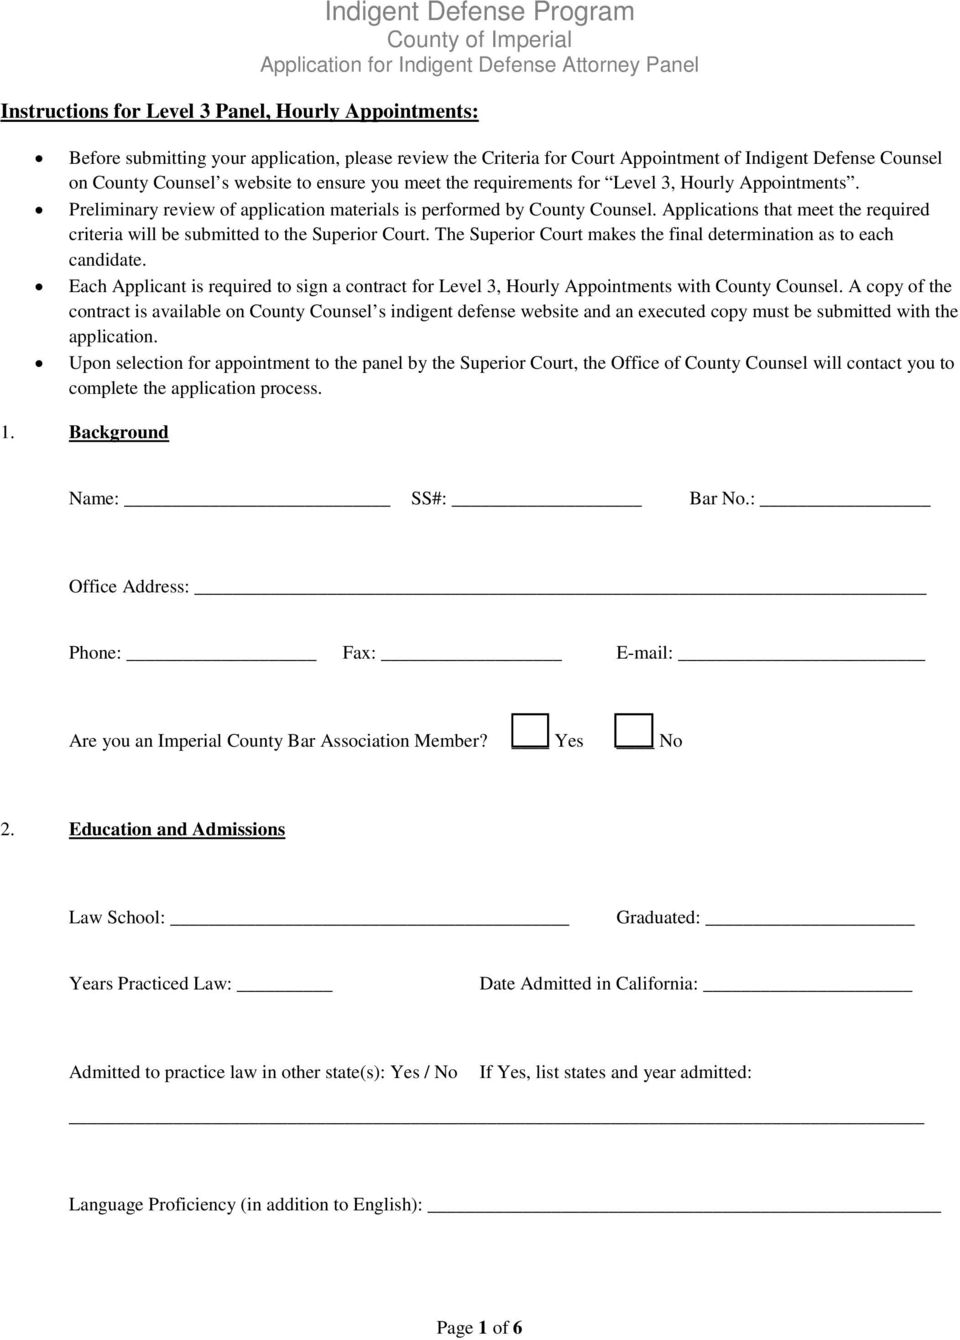 Applications that meet the required criteria will be submitted to the Superior Court. The Superior Court makes the final determination as to each candidate.